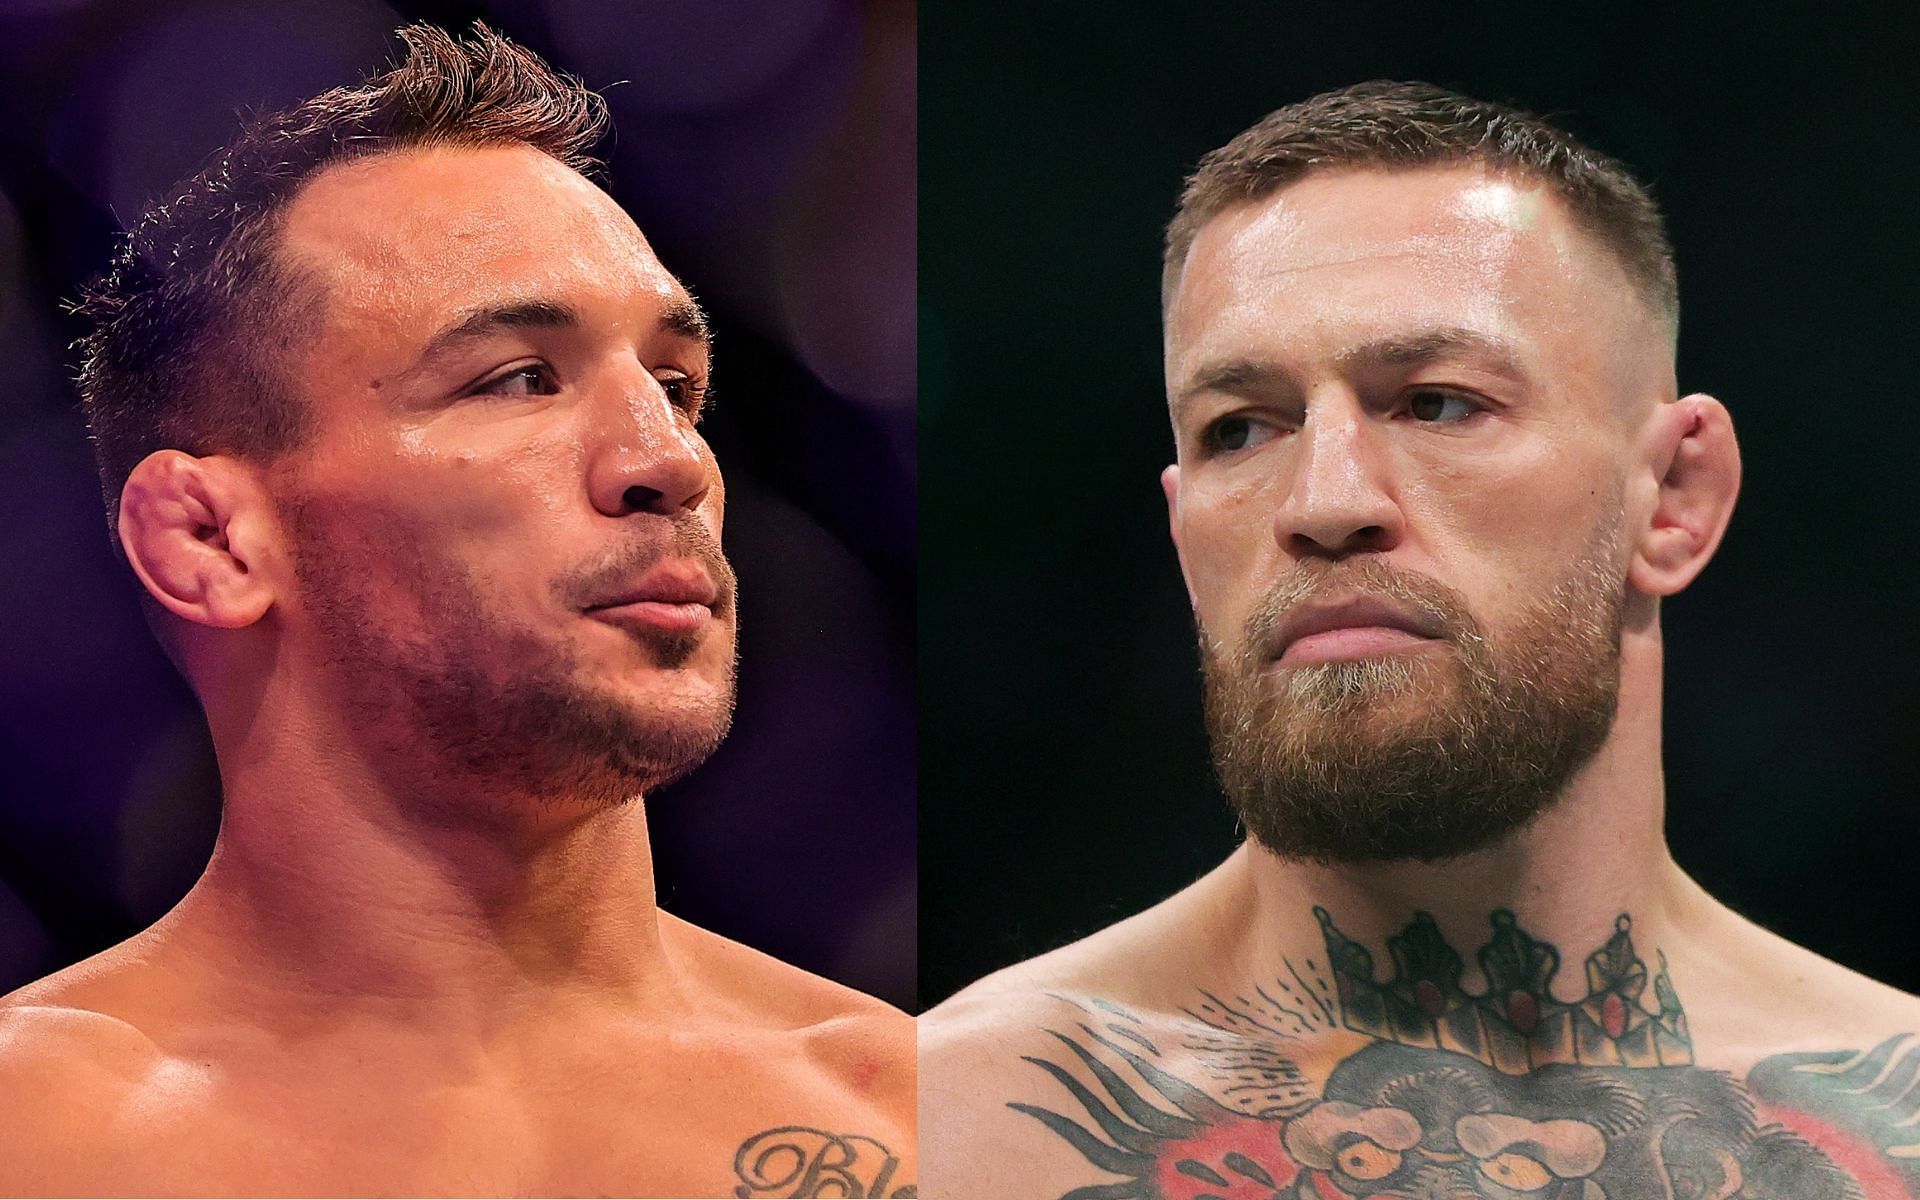 Michael Chandler (left) and Conor McGregor (right). [via Getty Images]